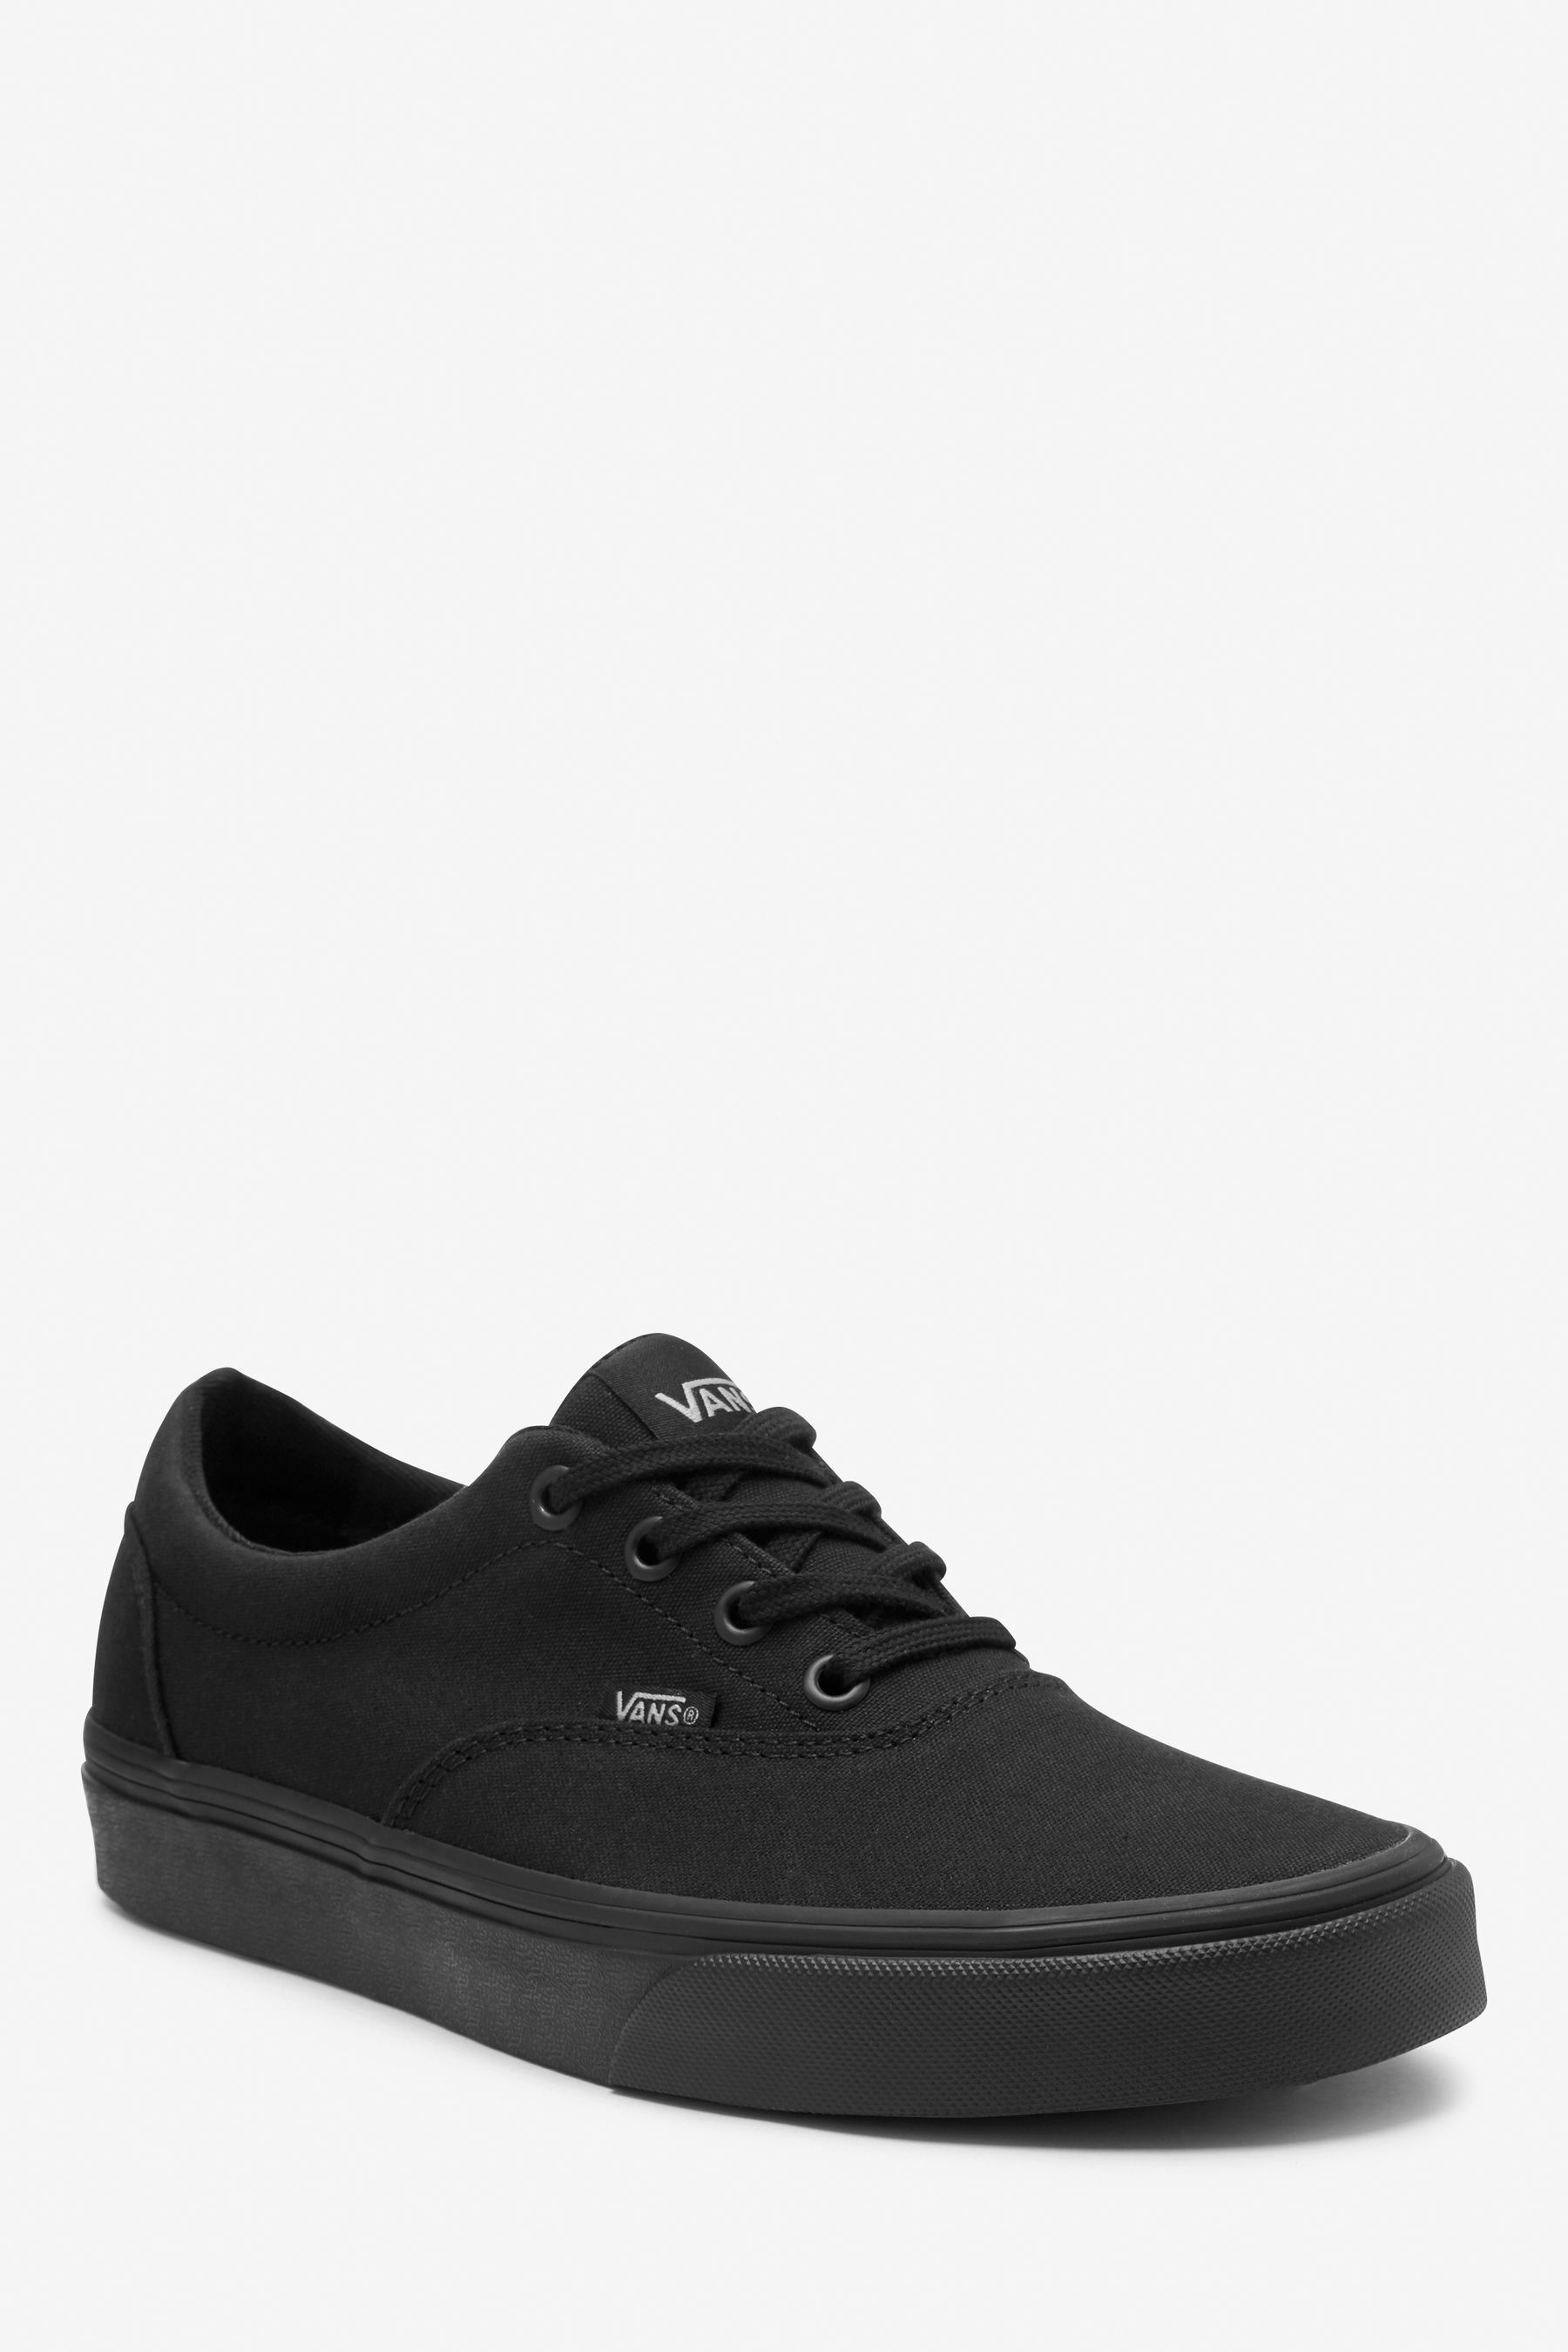 Buy Vans Womens Doheny Trainers from the Next UK online shop